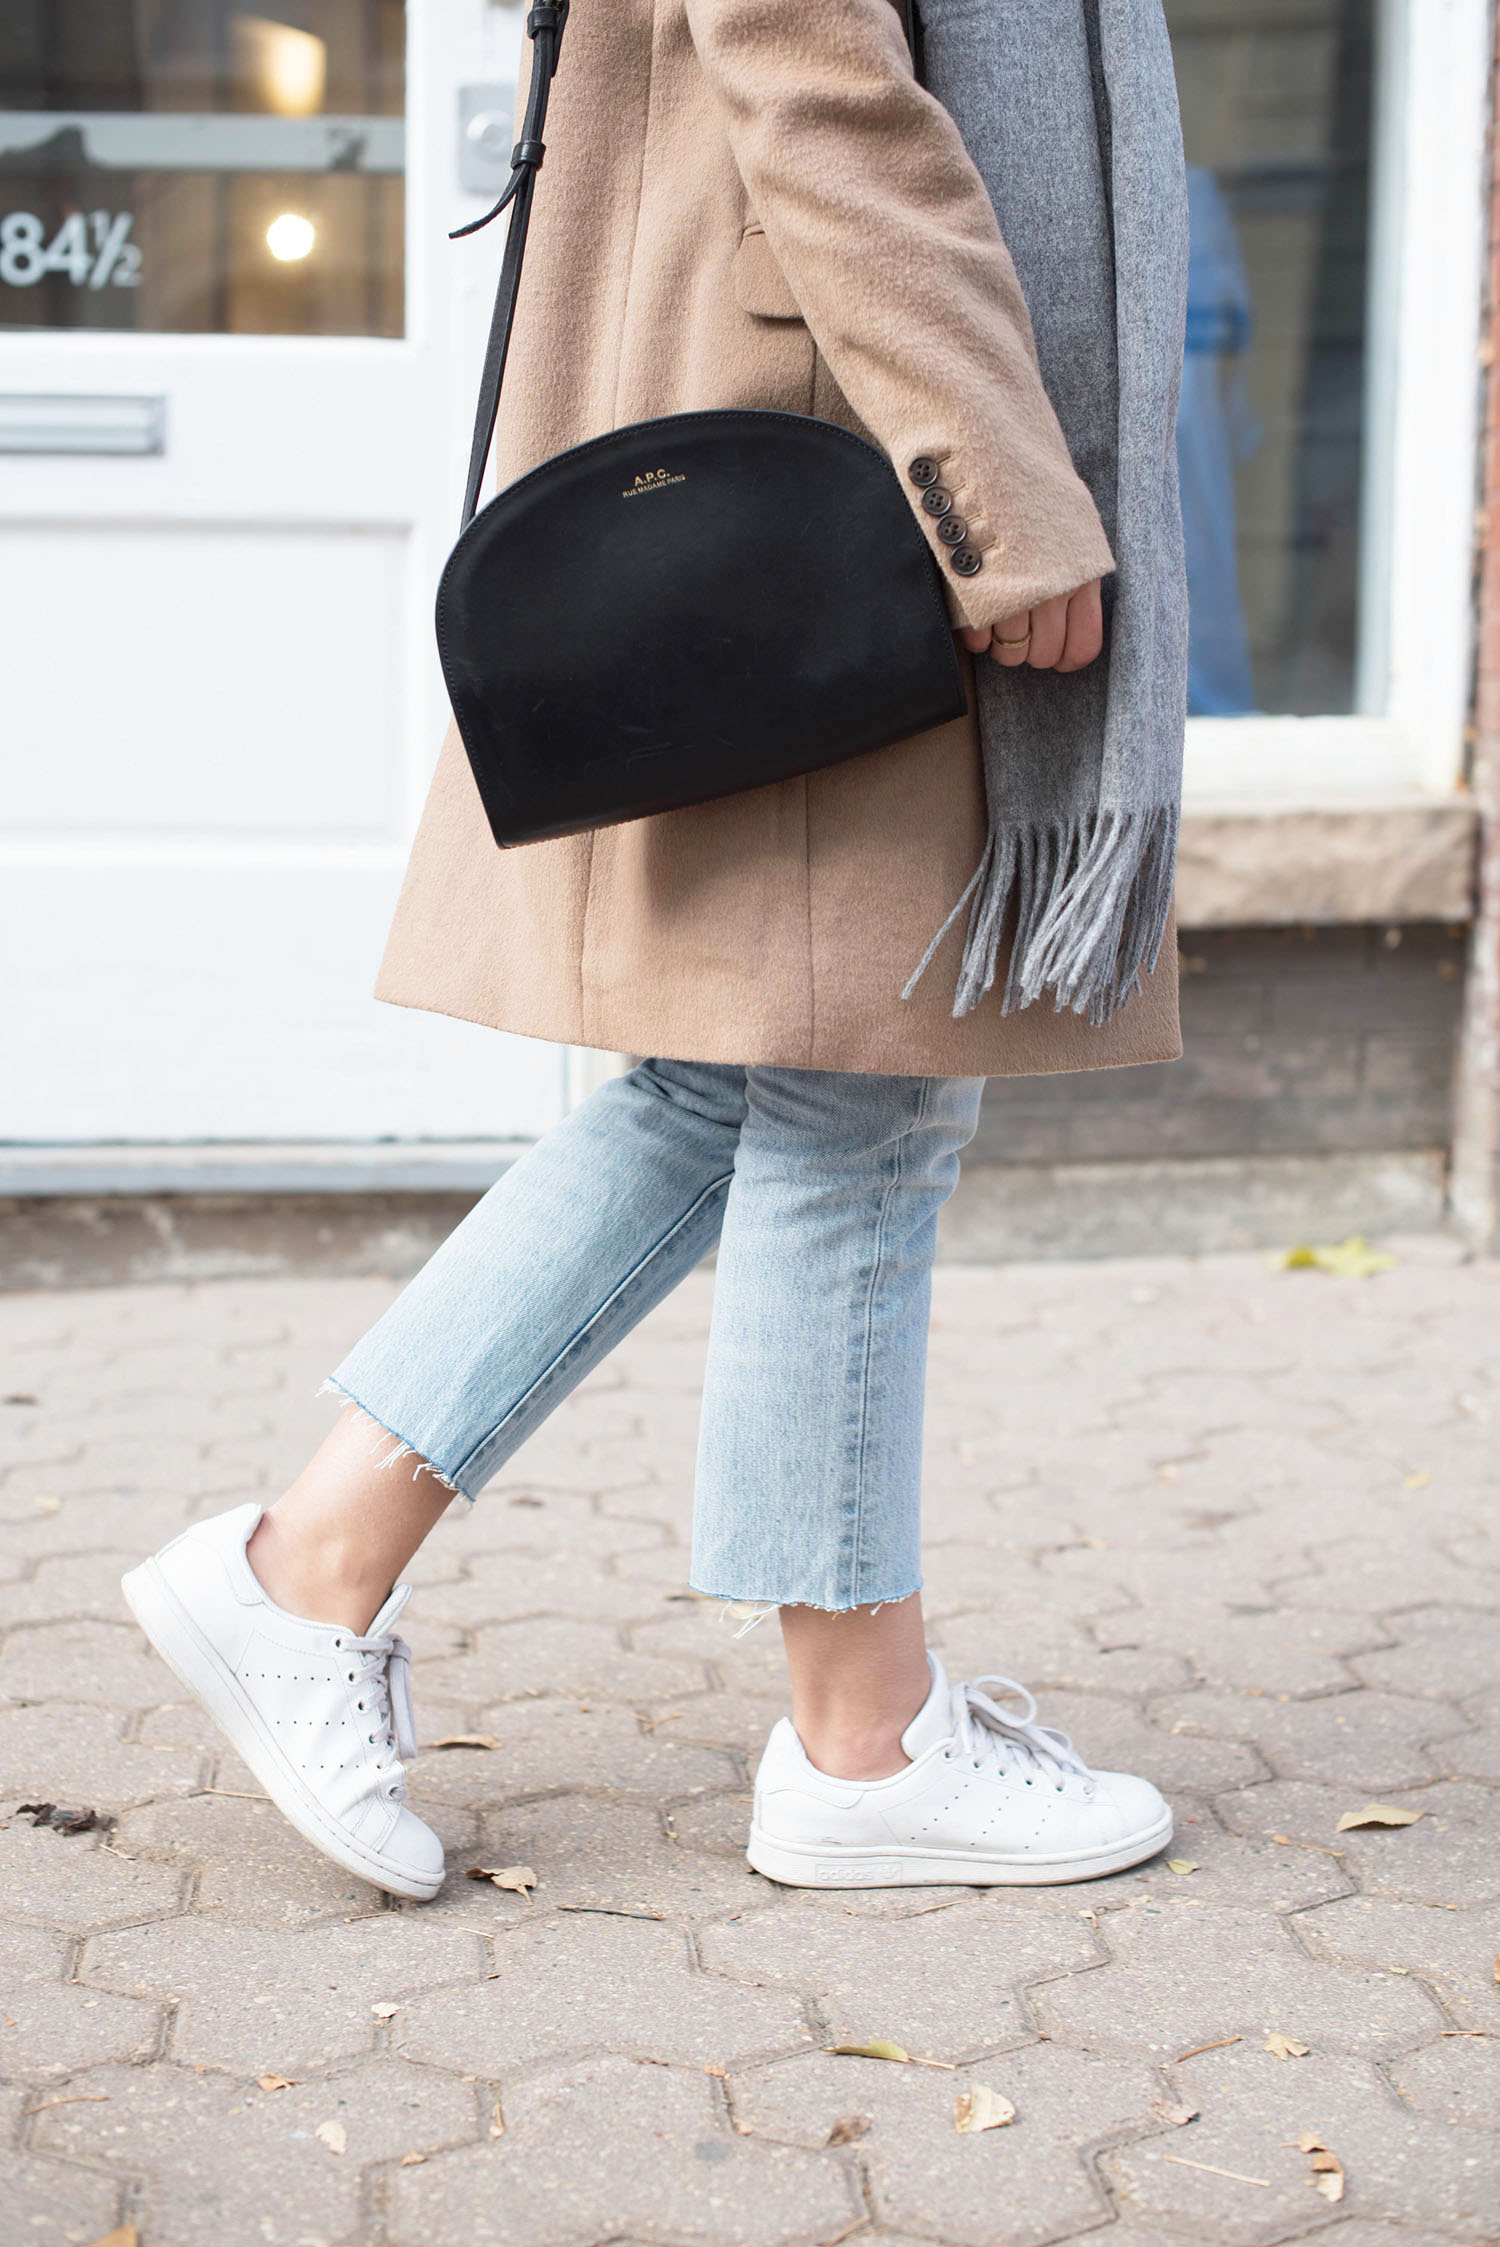 Outfit details on fashion blogger Cee Fardoe of Coco & Vera, including an APC halfmoon bag and Adidas Stan Smith sneakers